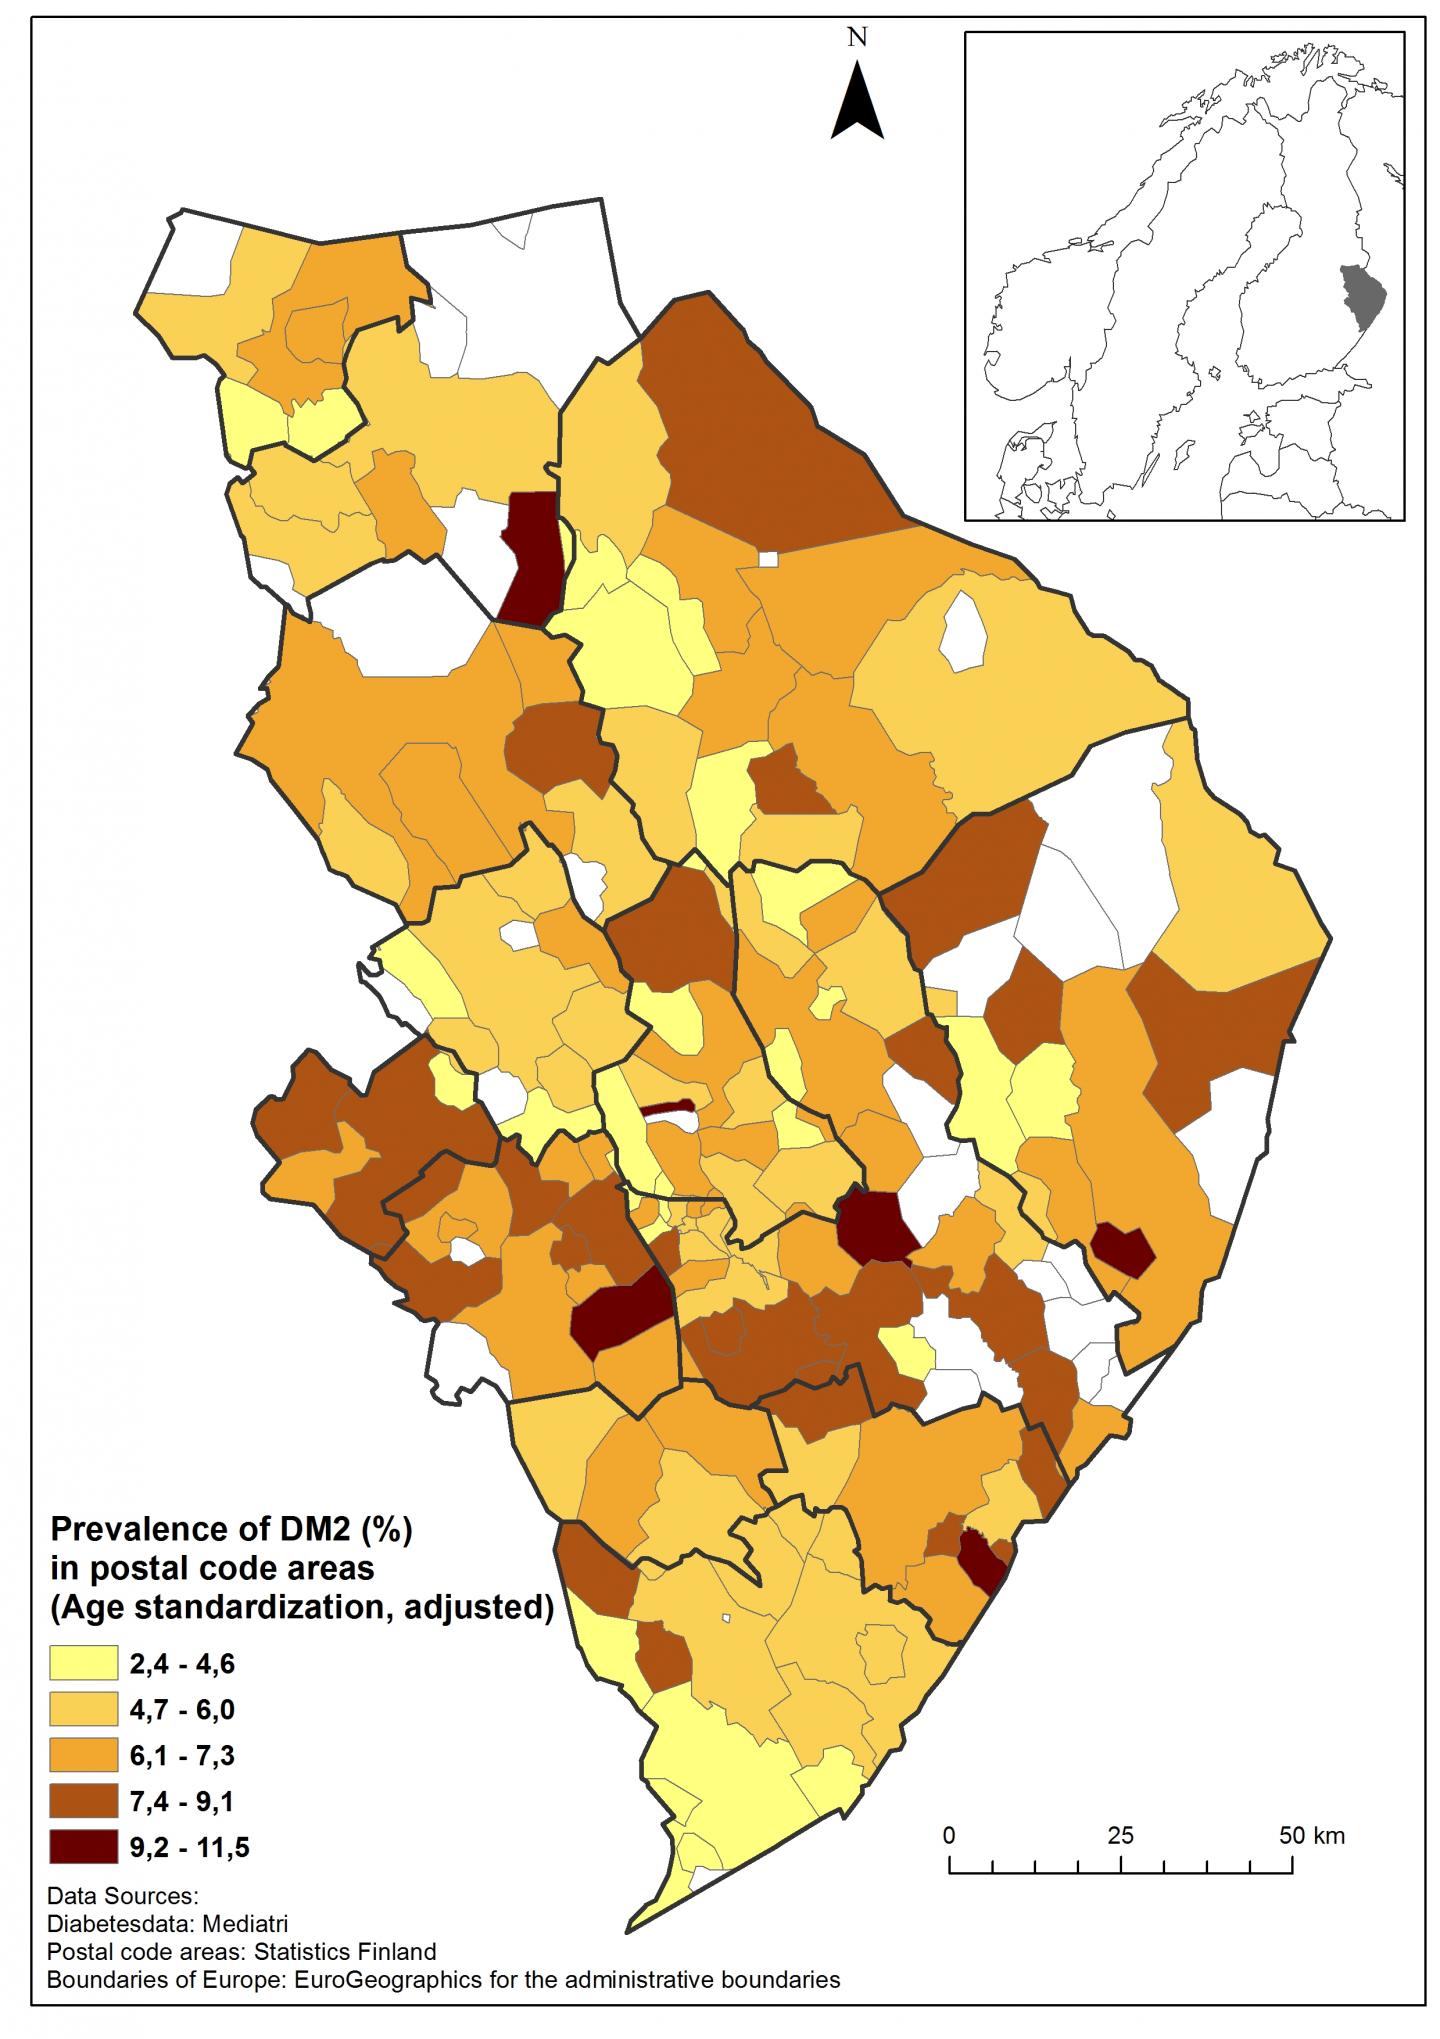 Prevalence of Type 2 Diabetes by Postal Code Area in Eastern Finland in 2012